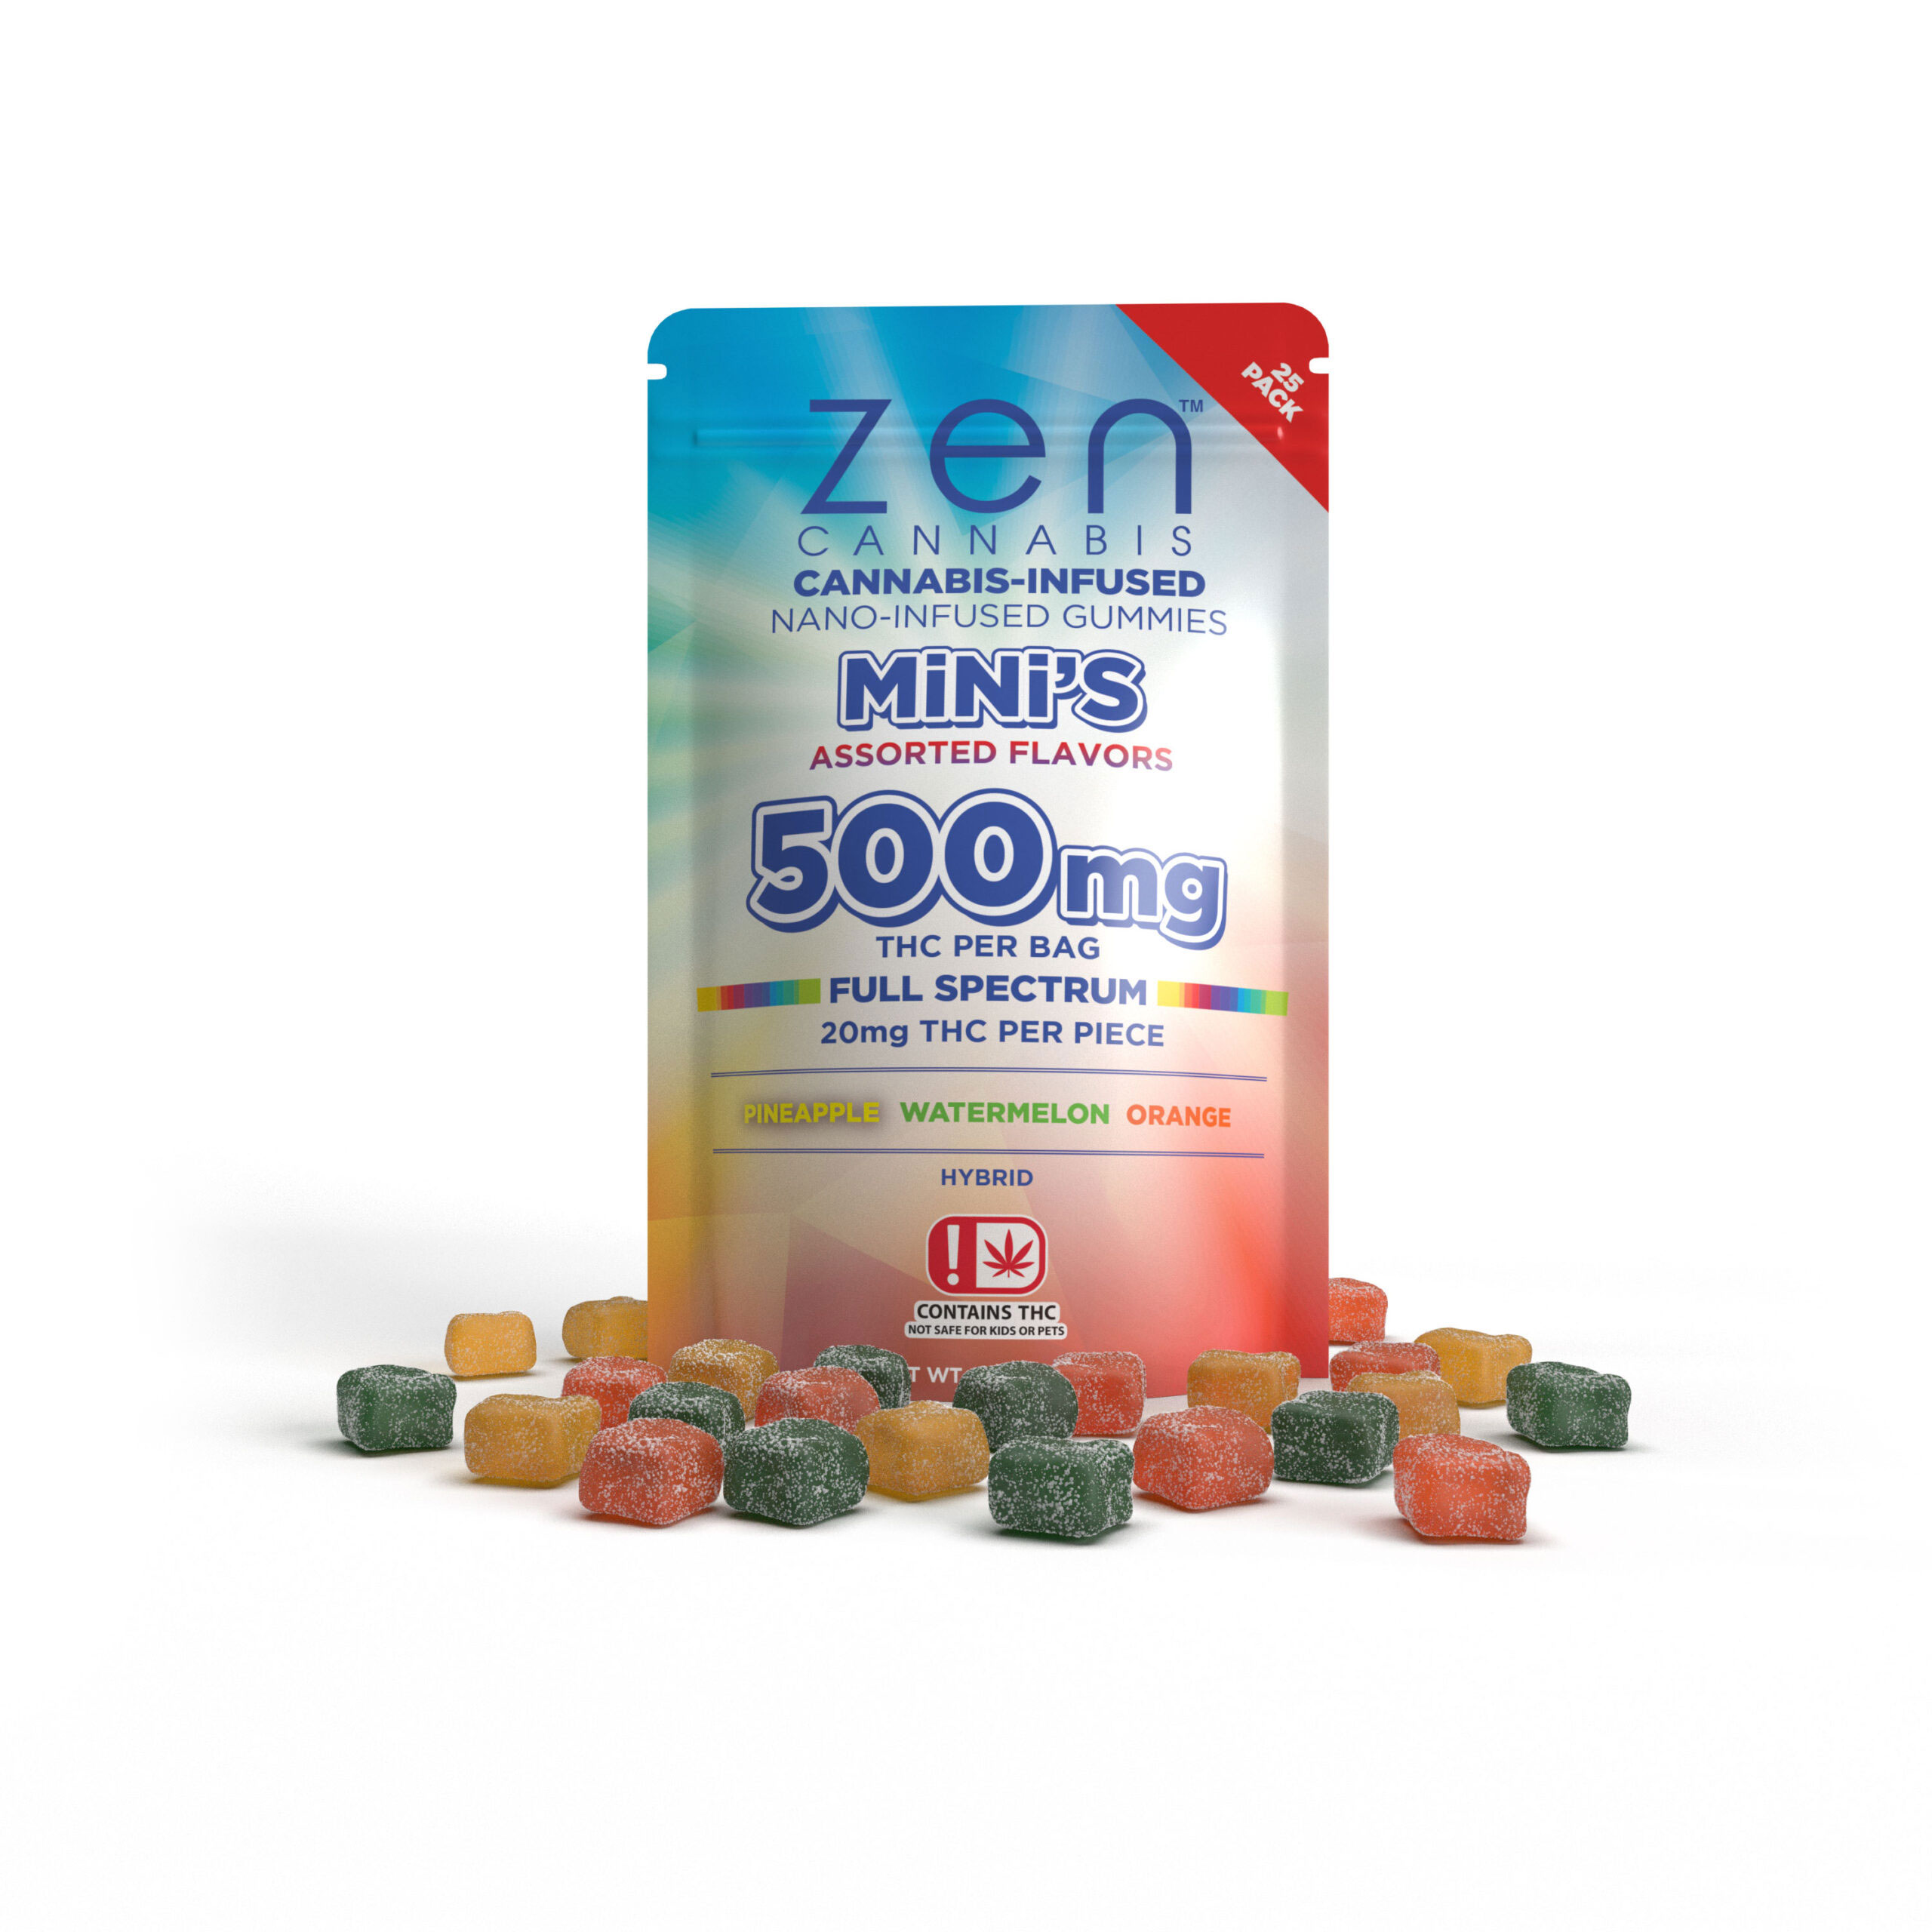 500mg-Minis-Bag-Gummies-Current-View-scaled